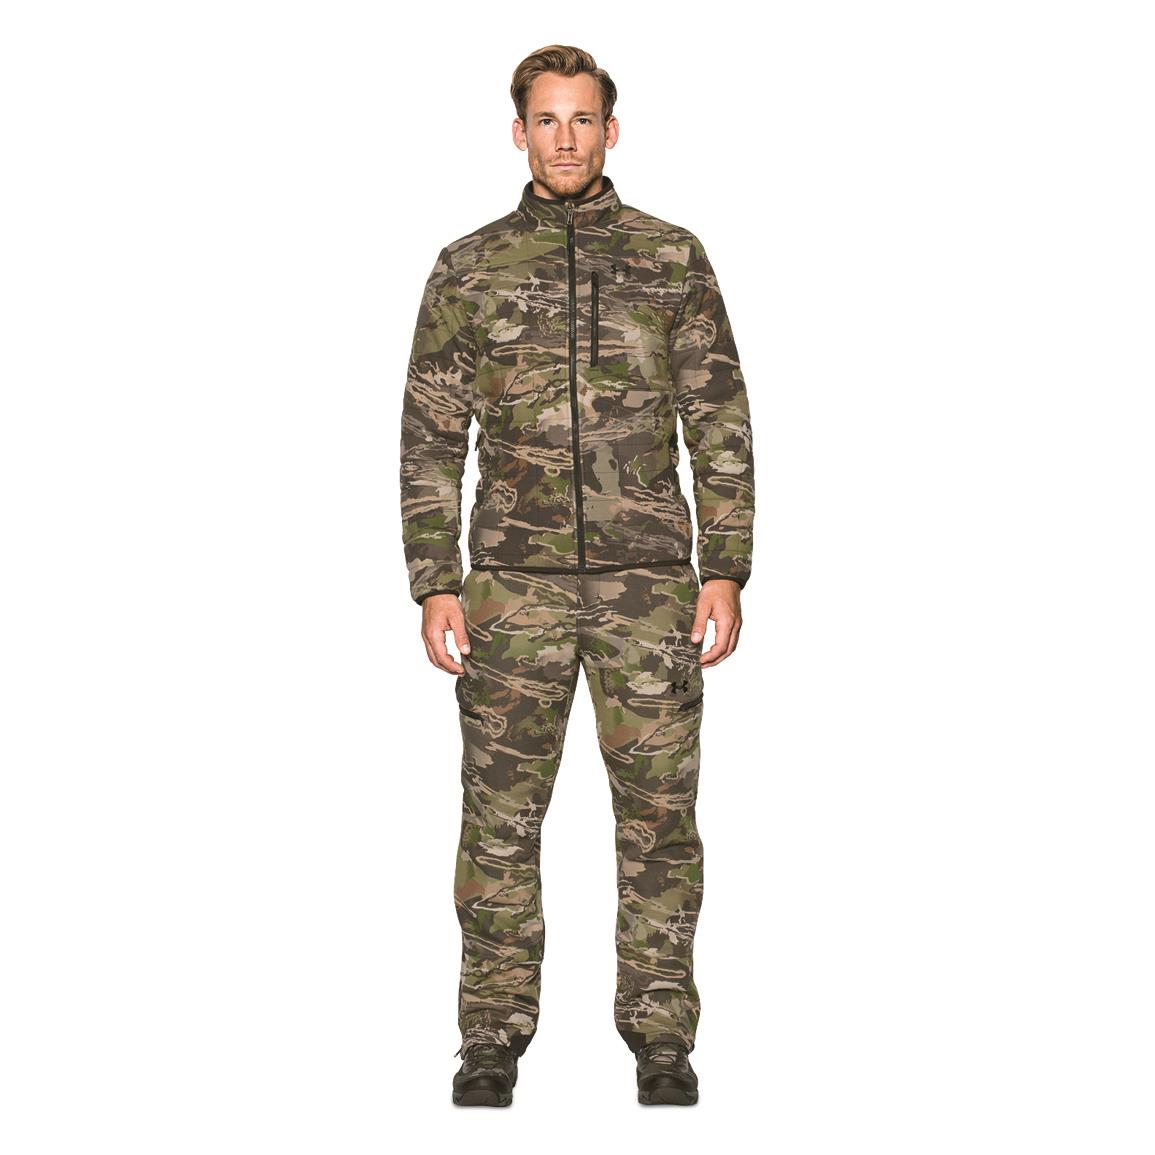 under armour men's stealth extreme jacket